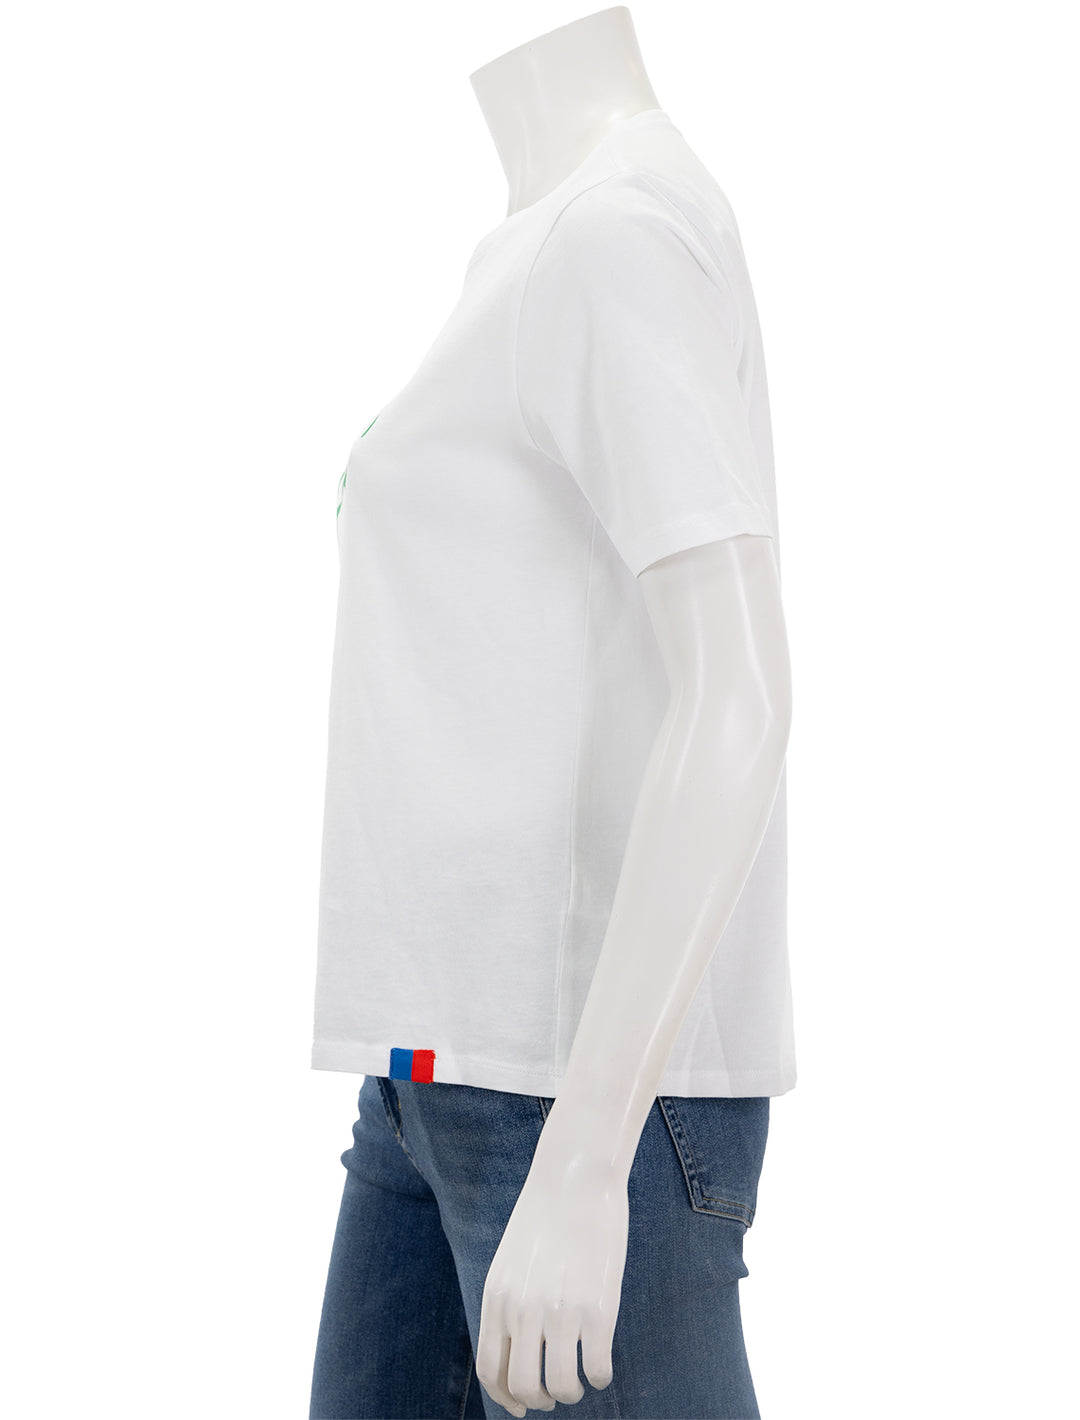 Side view of KULE's the LOVE modern tee in white.